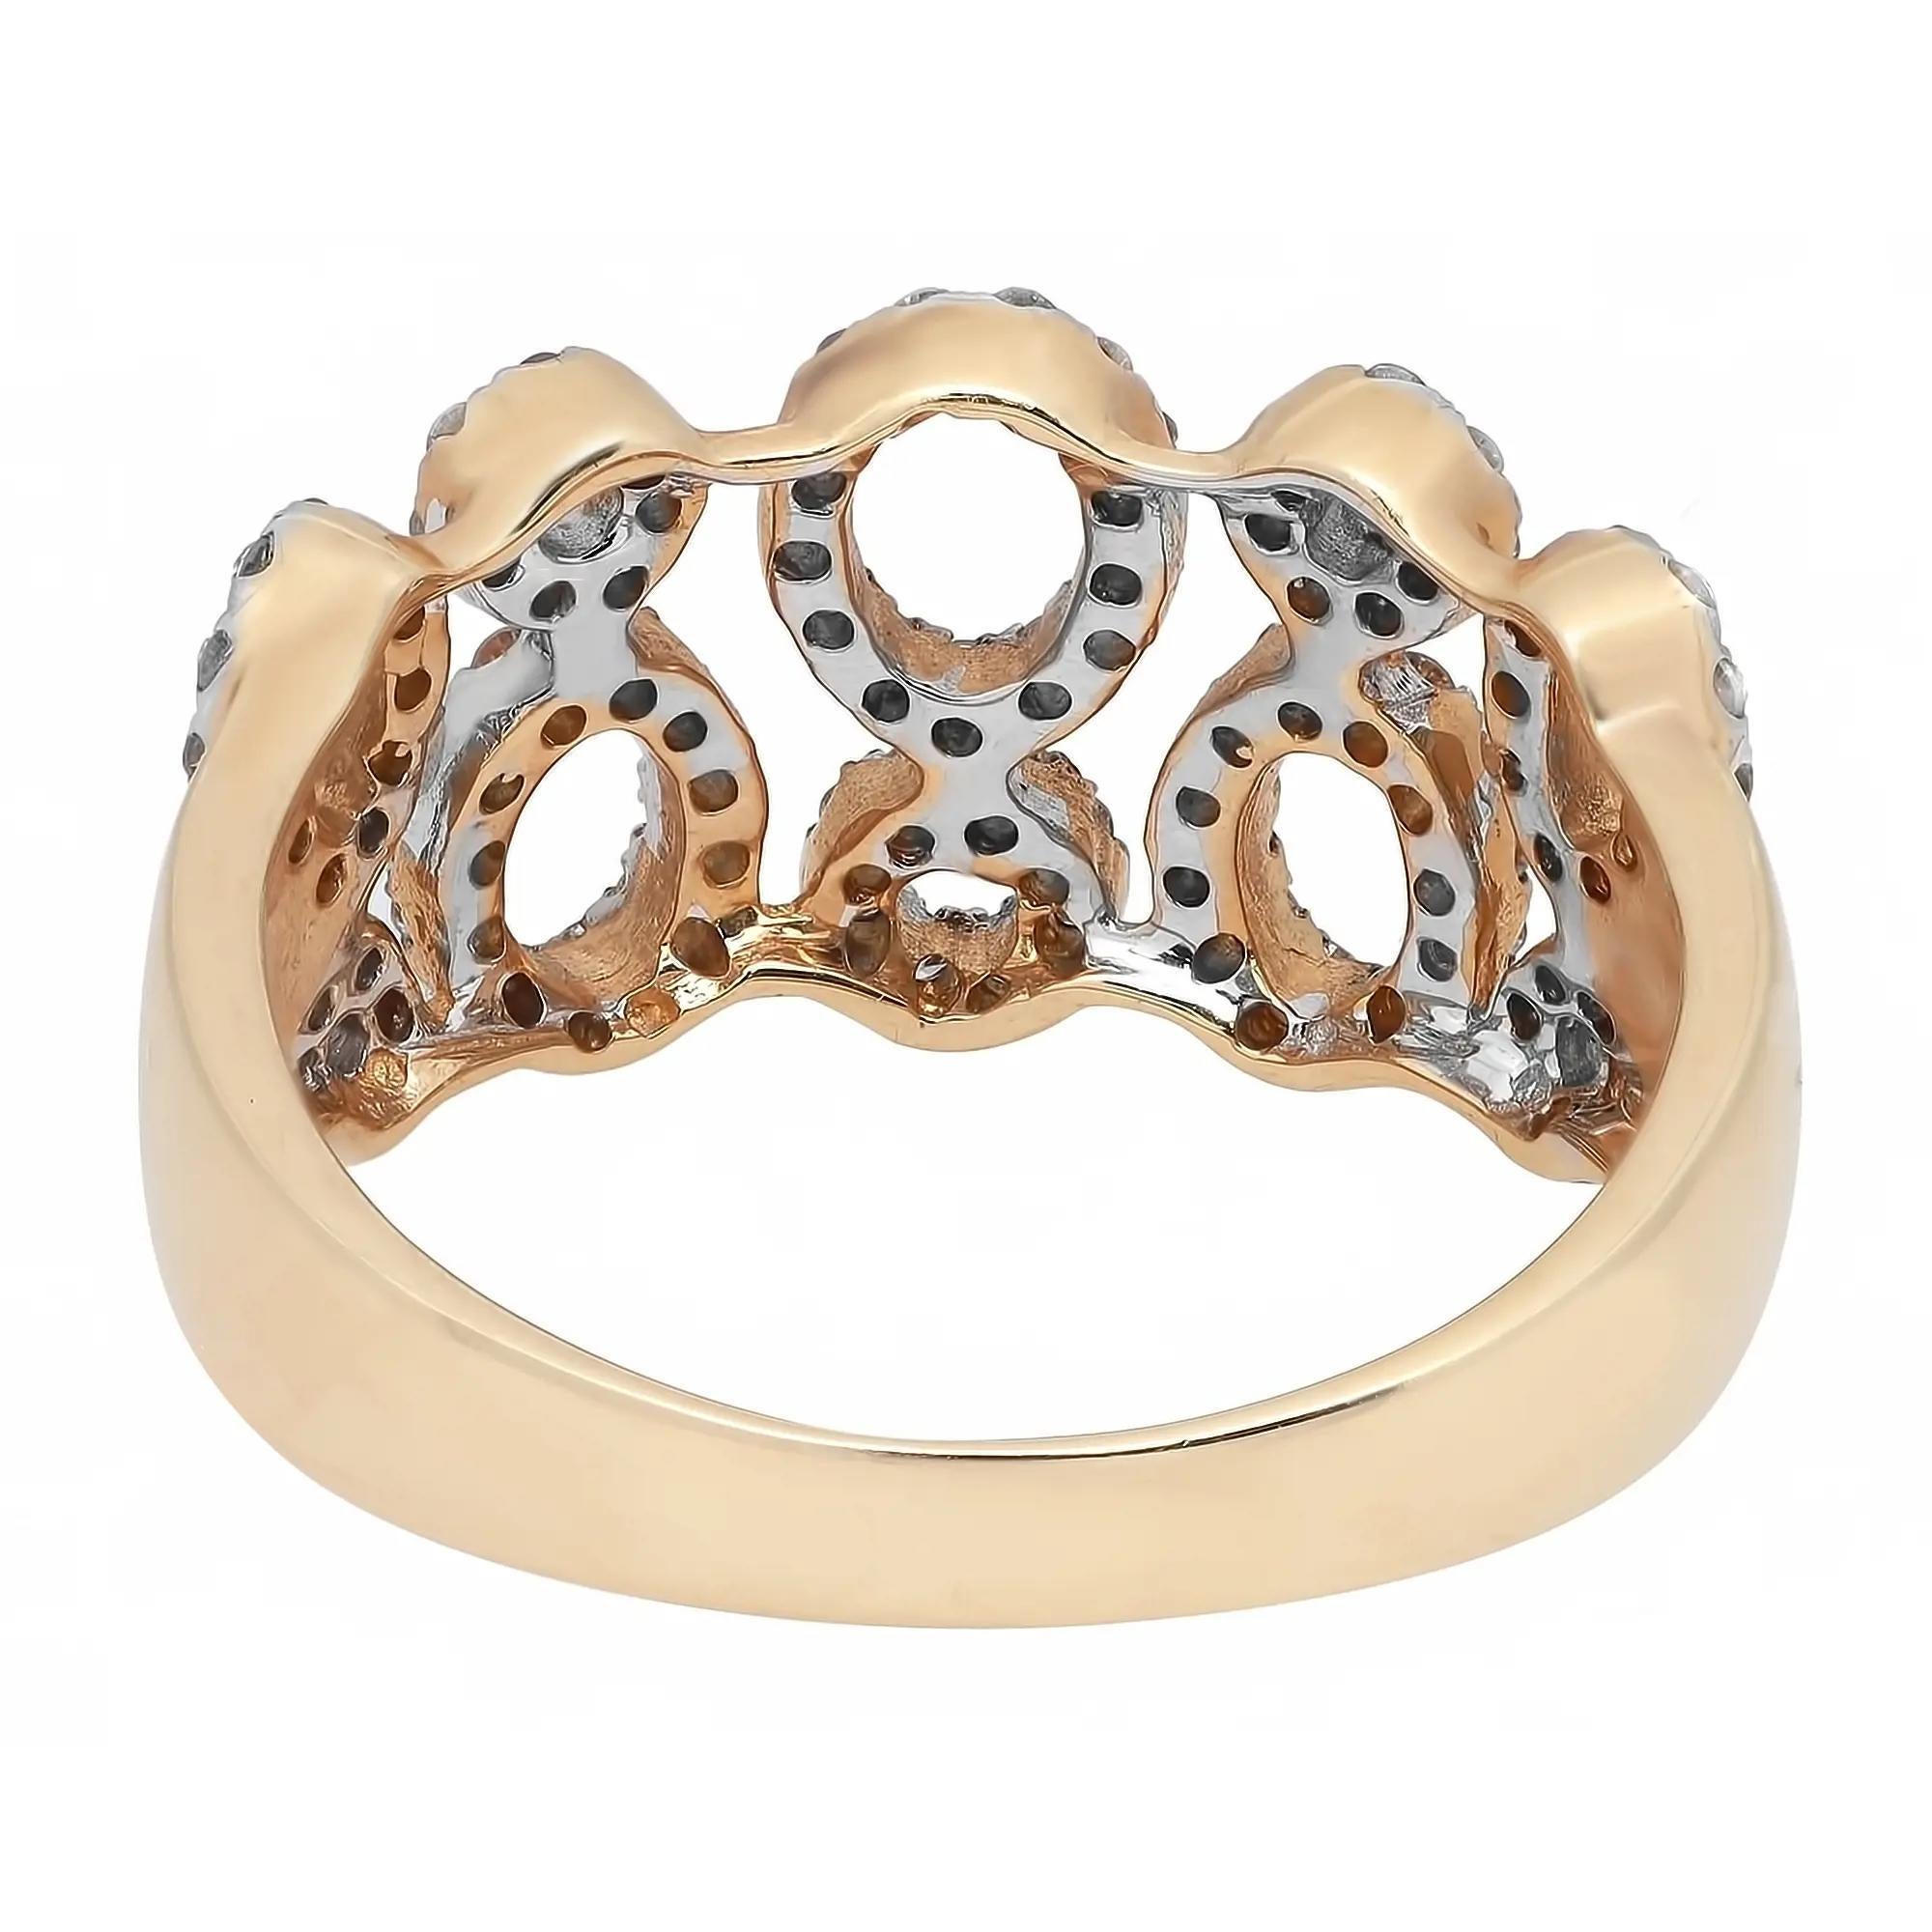 This wide circular openwork design band ring is crafted from rich 14K yellow gold. Set with round cut diamonds, totaling 0.52 carat. The diamond color is I with SI2-I clarity. Ring size 7.5. Width of the ring is 11 mm. Total weight: 4.96 grams.